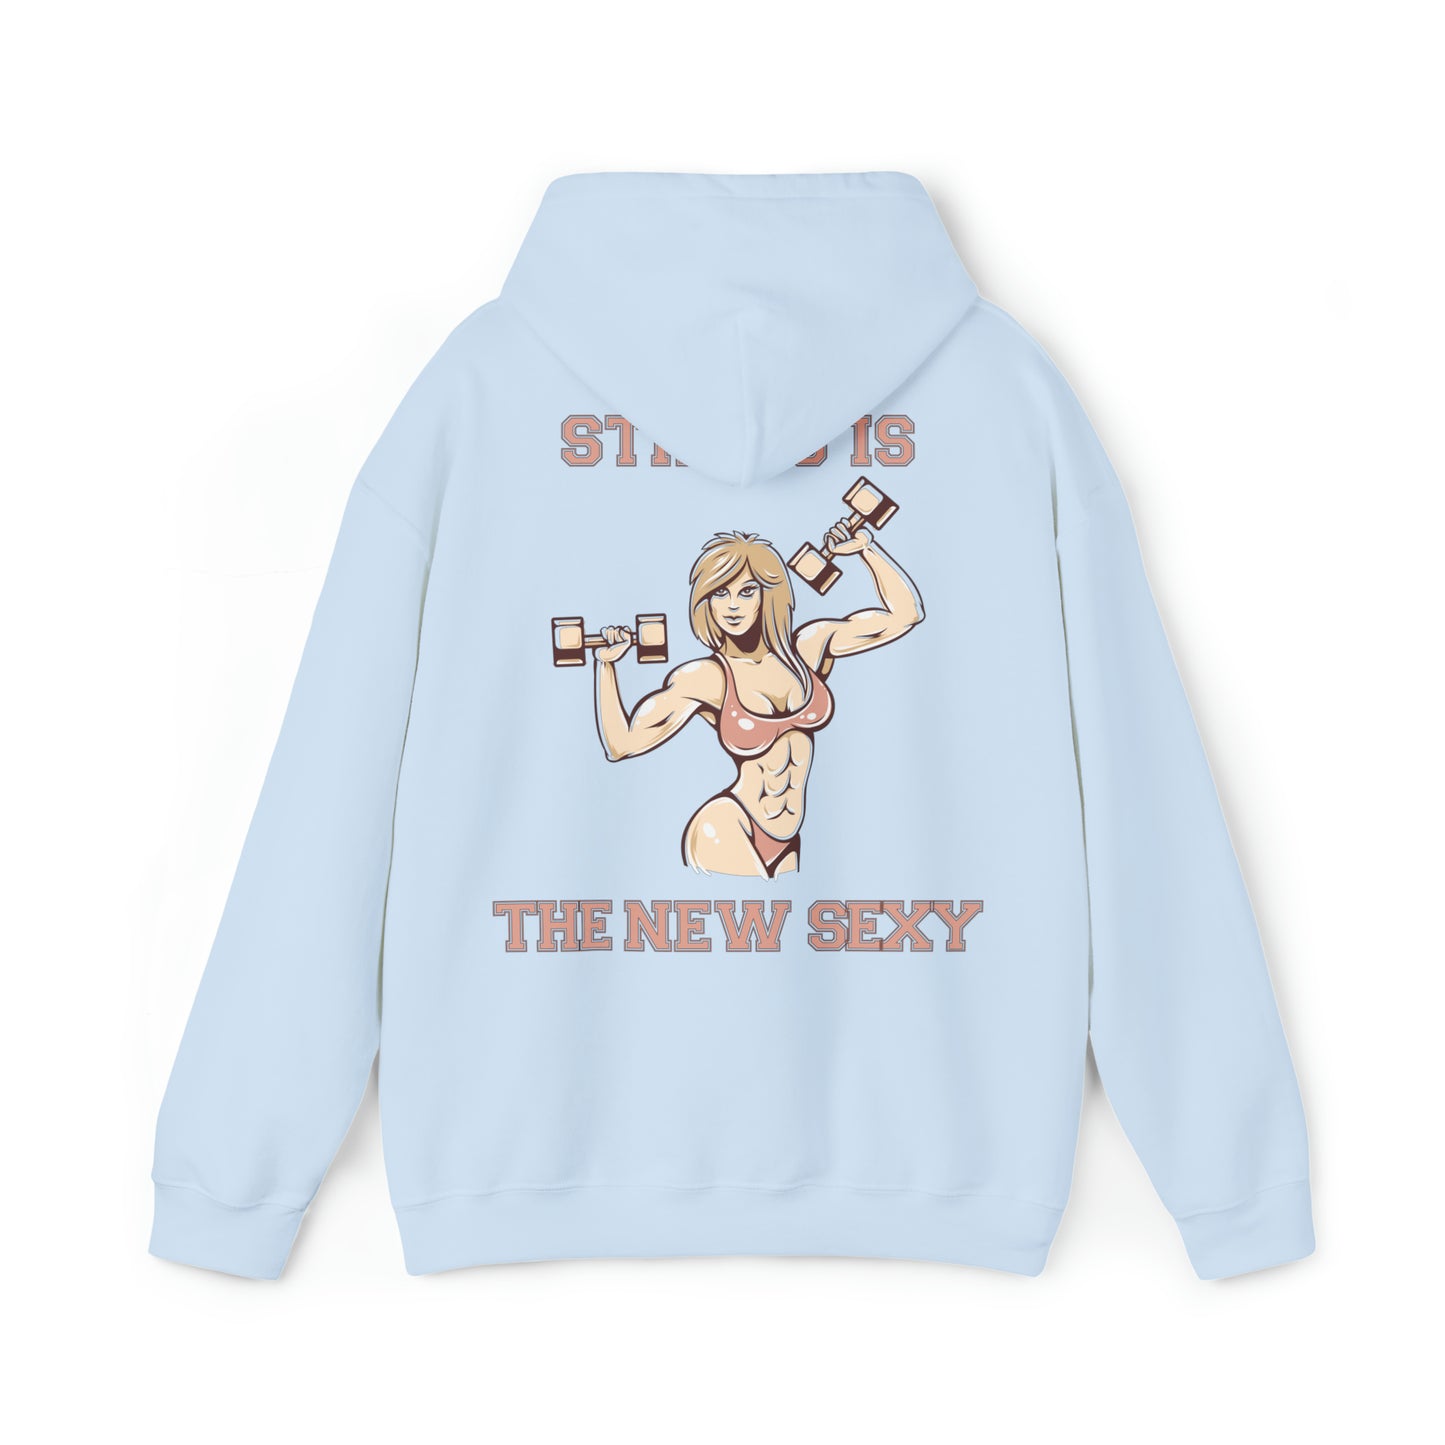 STRONG IS THE NEW SEXY x Hoodie